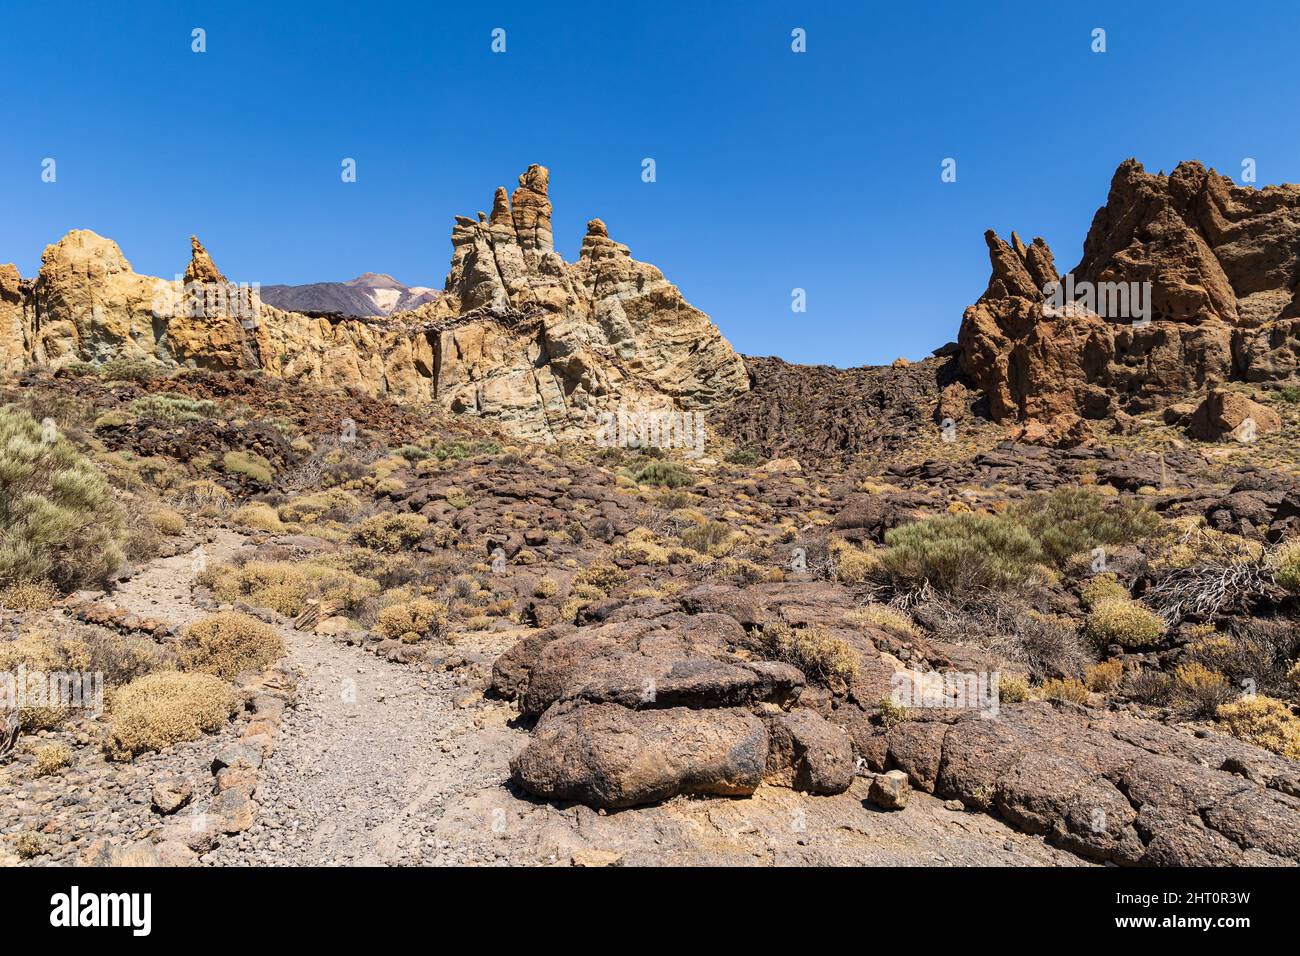 Roques de Garcia rock formation and lava saddle at Teide National Park, Tenerife, Spain Stock Photo